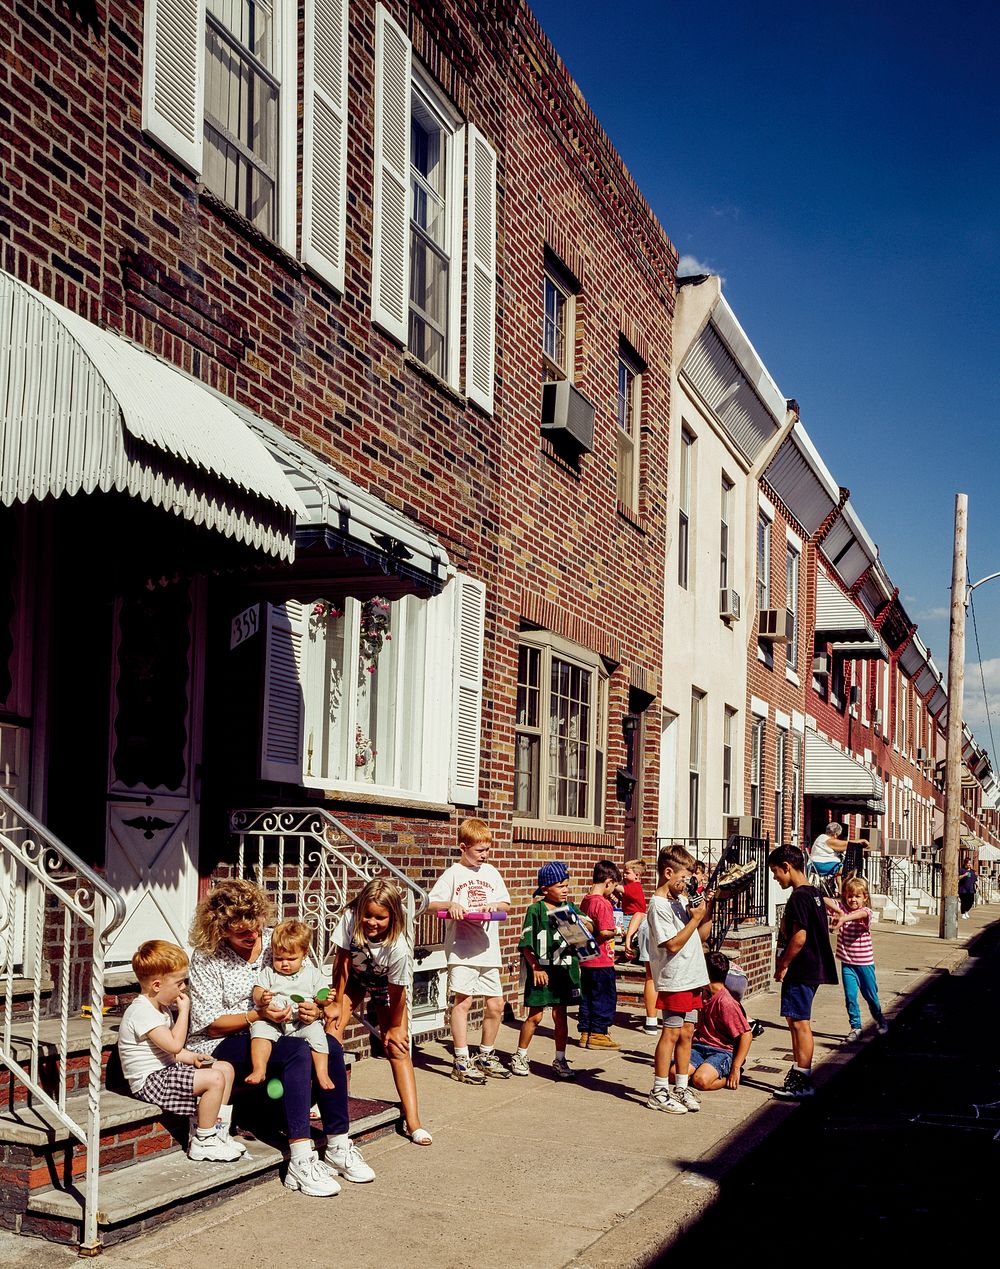 Family time on Daly Street in the Whitman row-house in South Philadelphia, Pennsylvania. Original image from Carol M.…